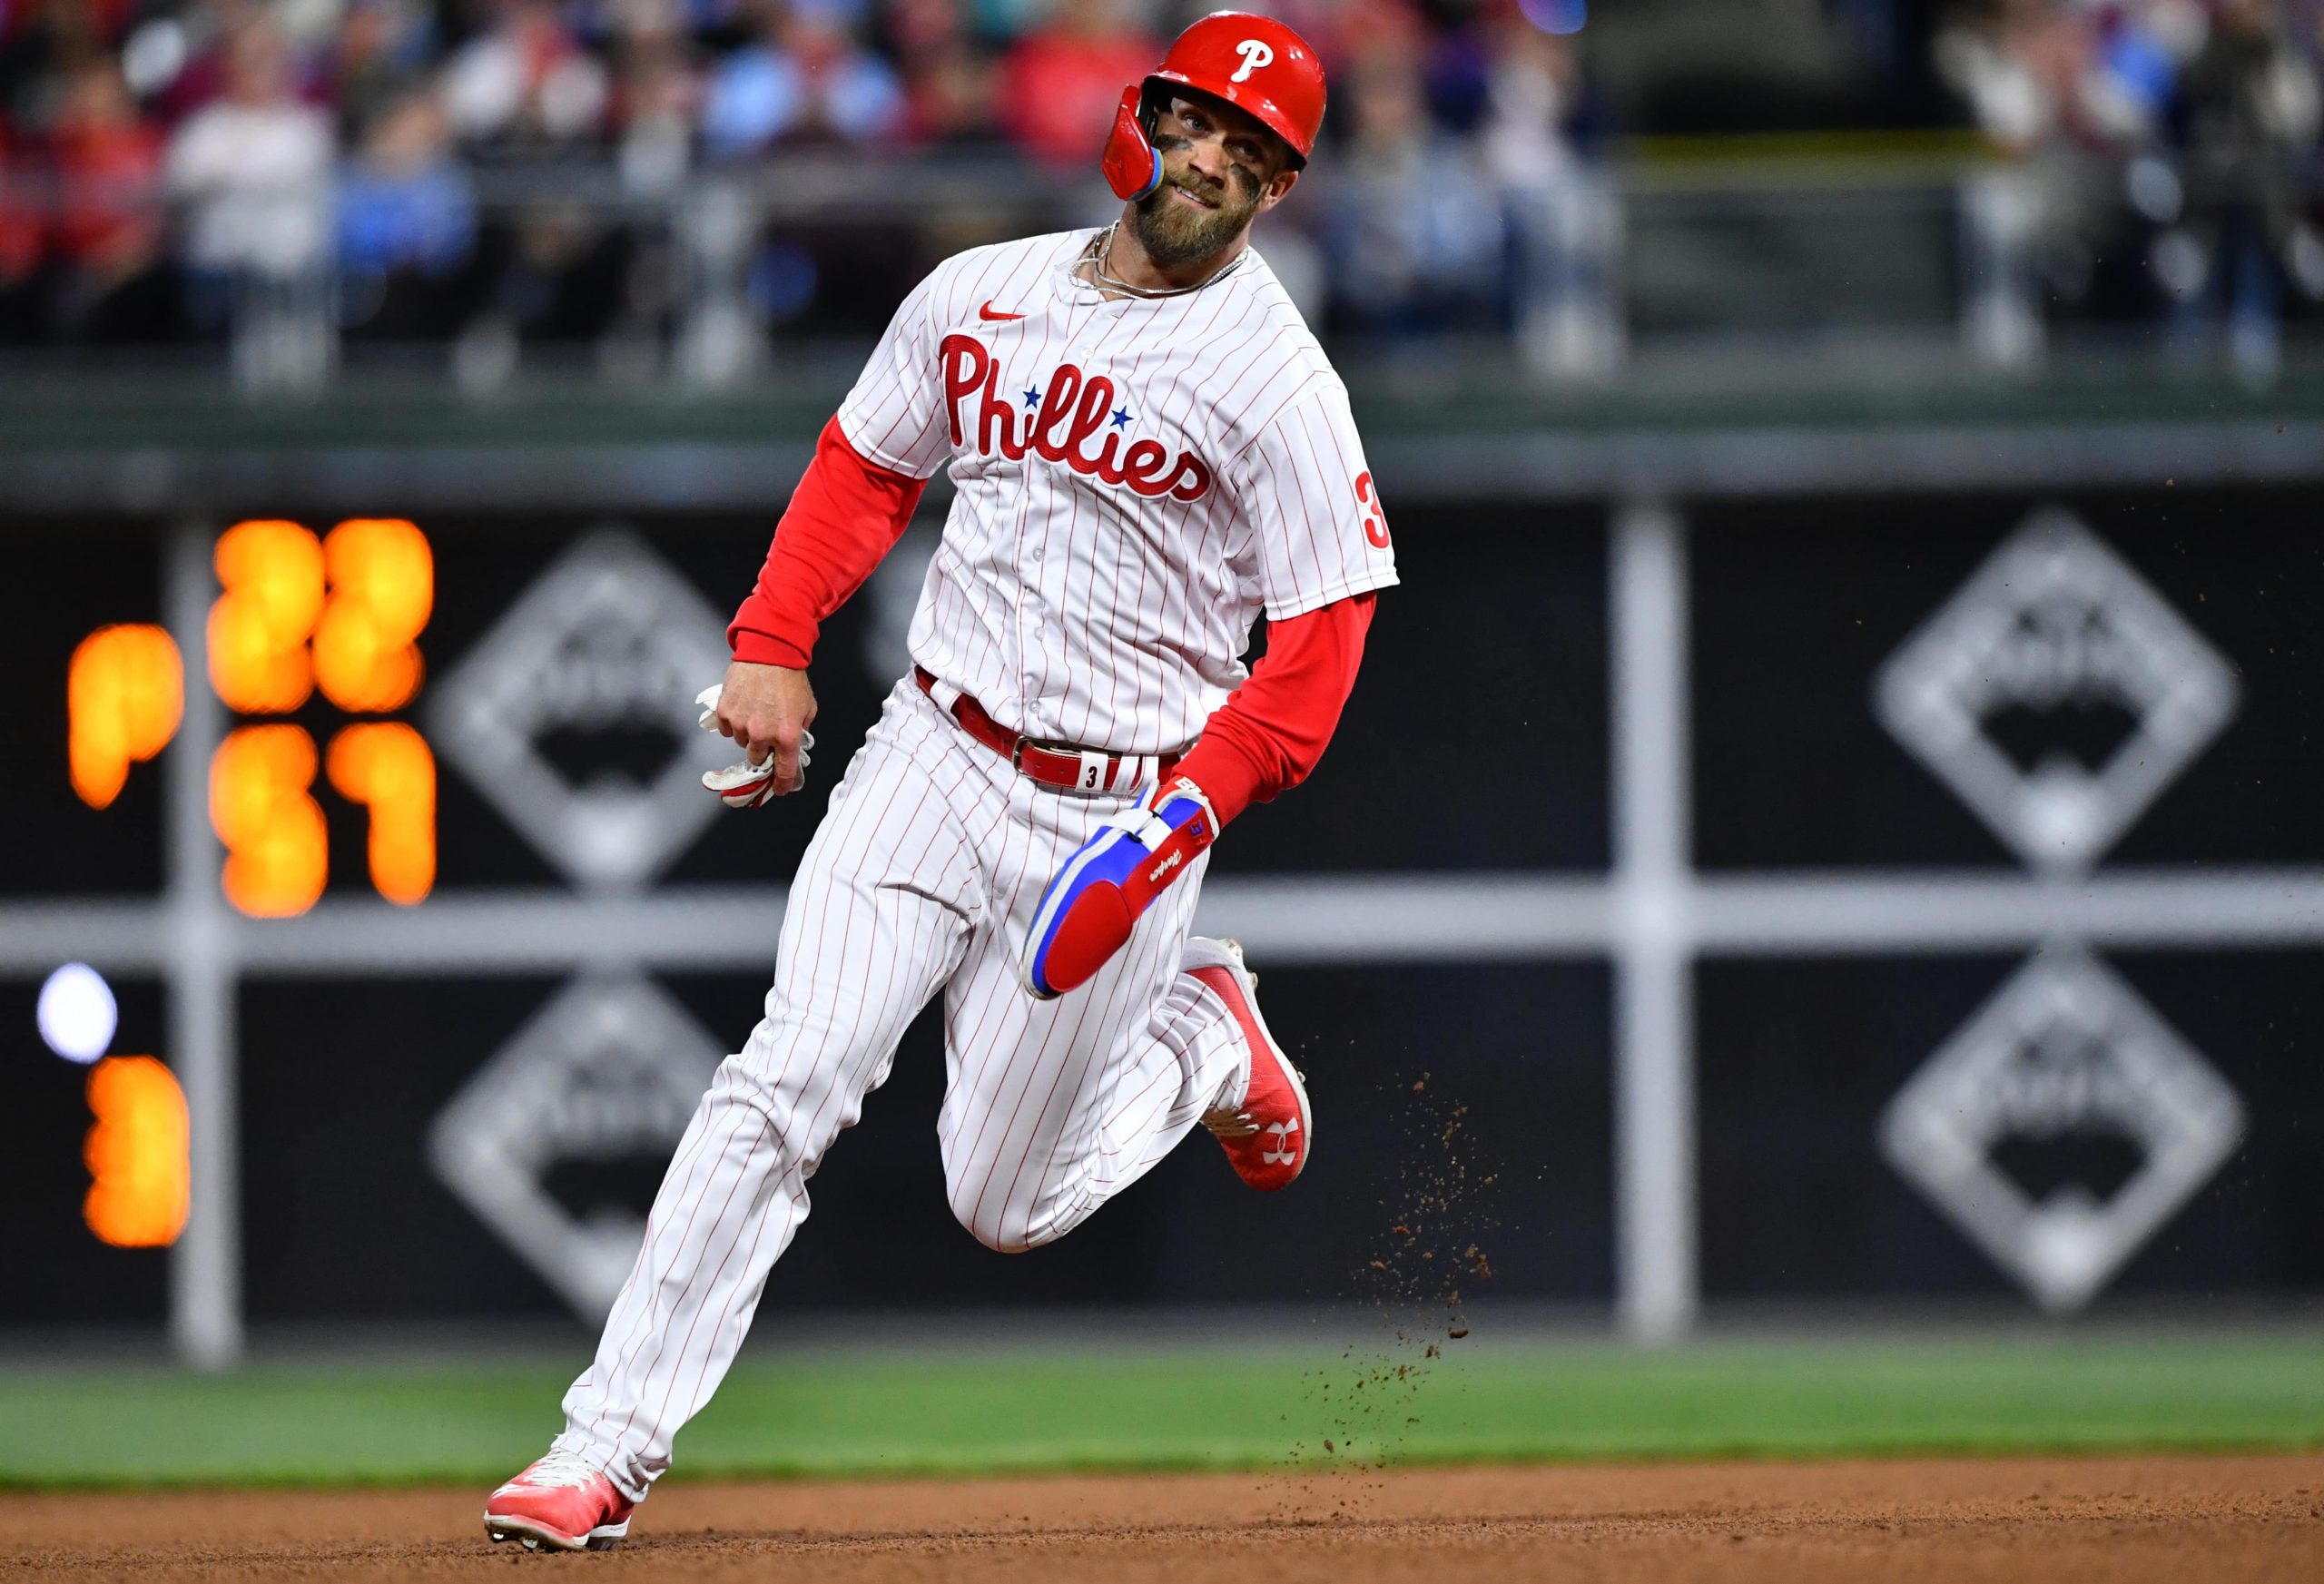 Philadelphia Phillies outfielder Bryce Harper (3) runs toward third base in the fourth inning against the New York Mets at Citizens Bank Park.